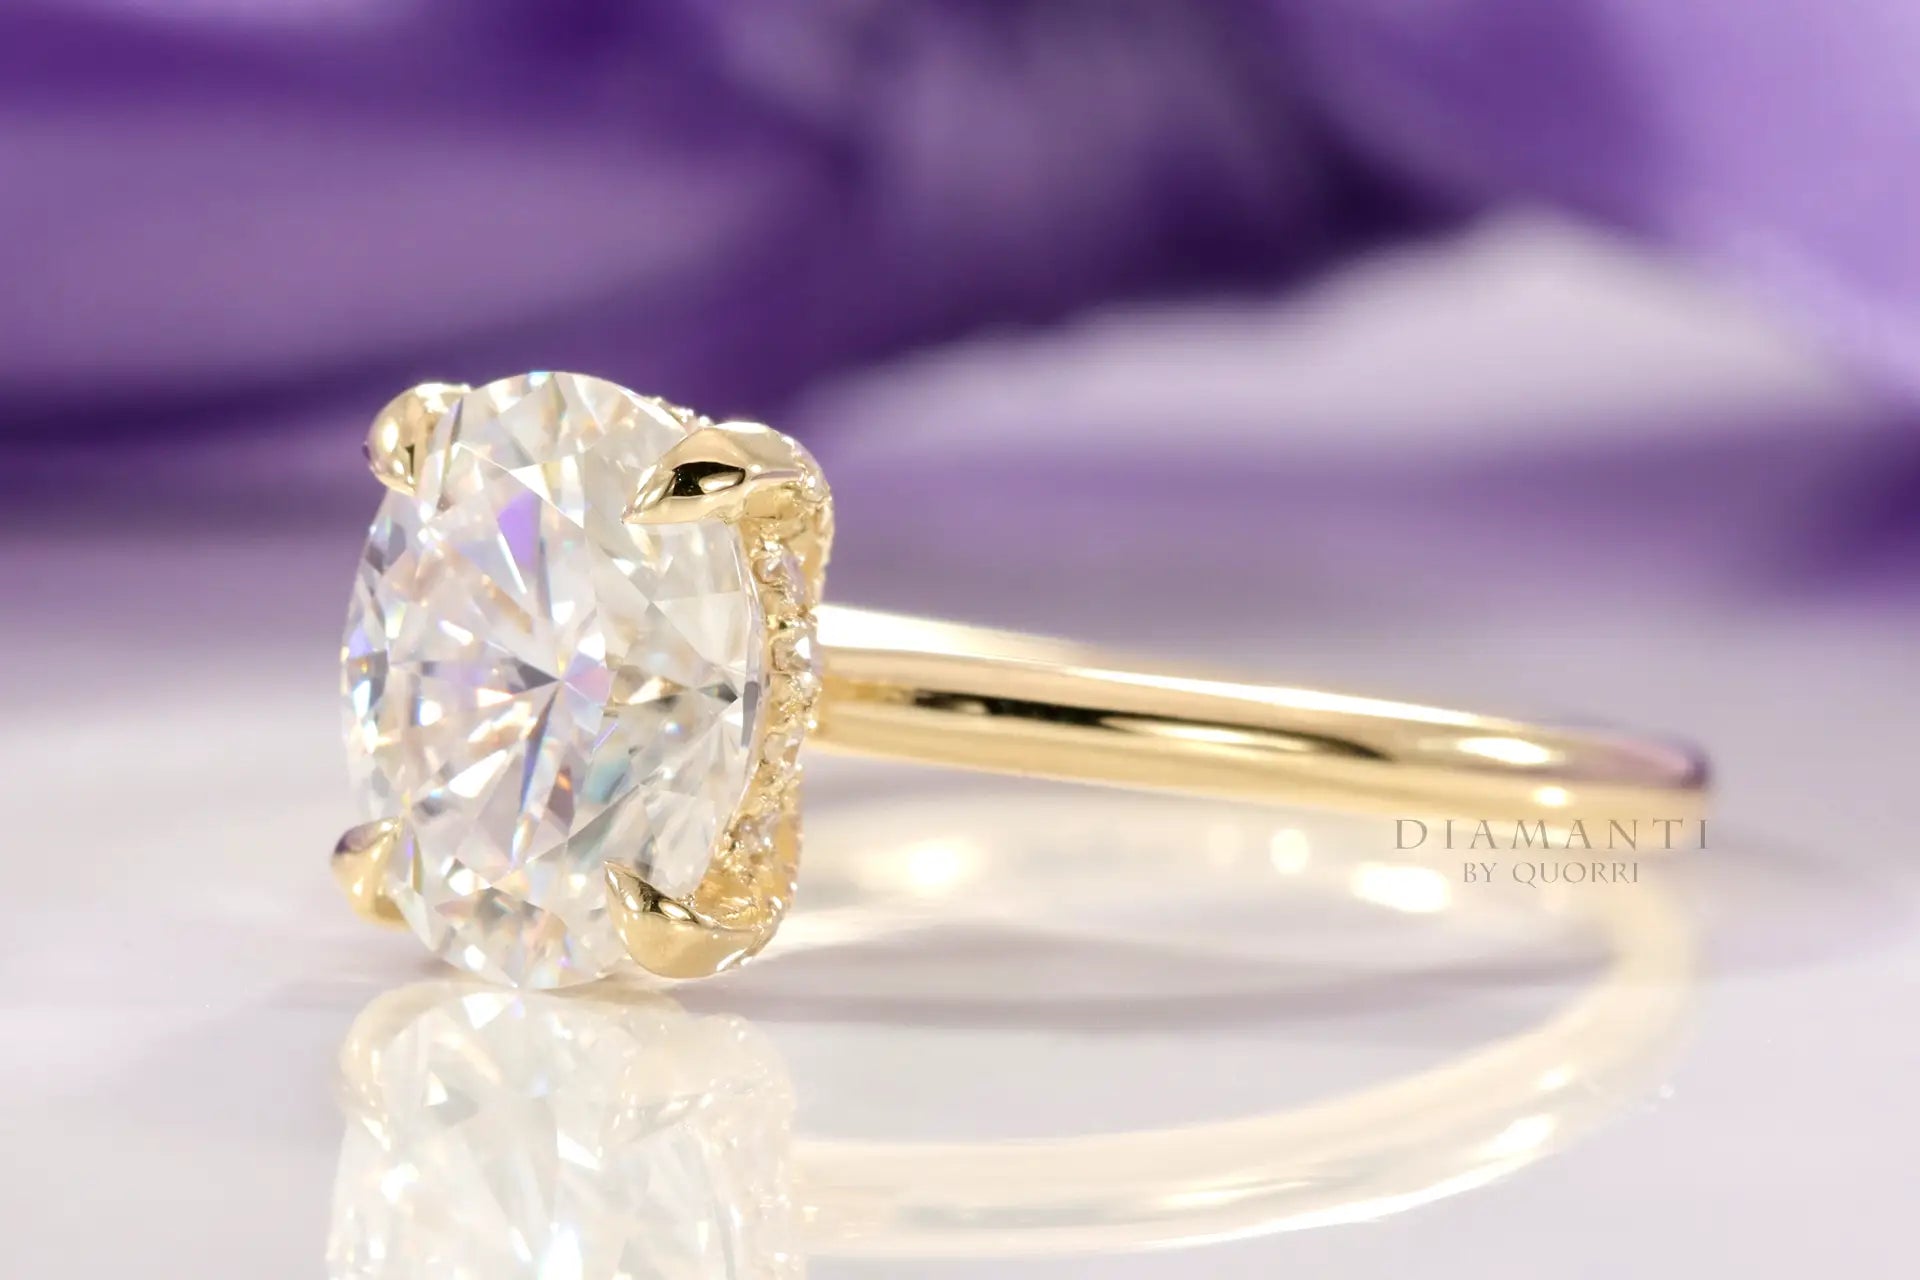 under-halo claw prong 18k yellow gold 2 carat oval lab diamond engagement ring Quorri